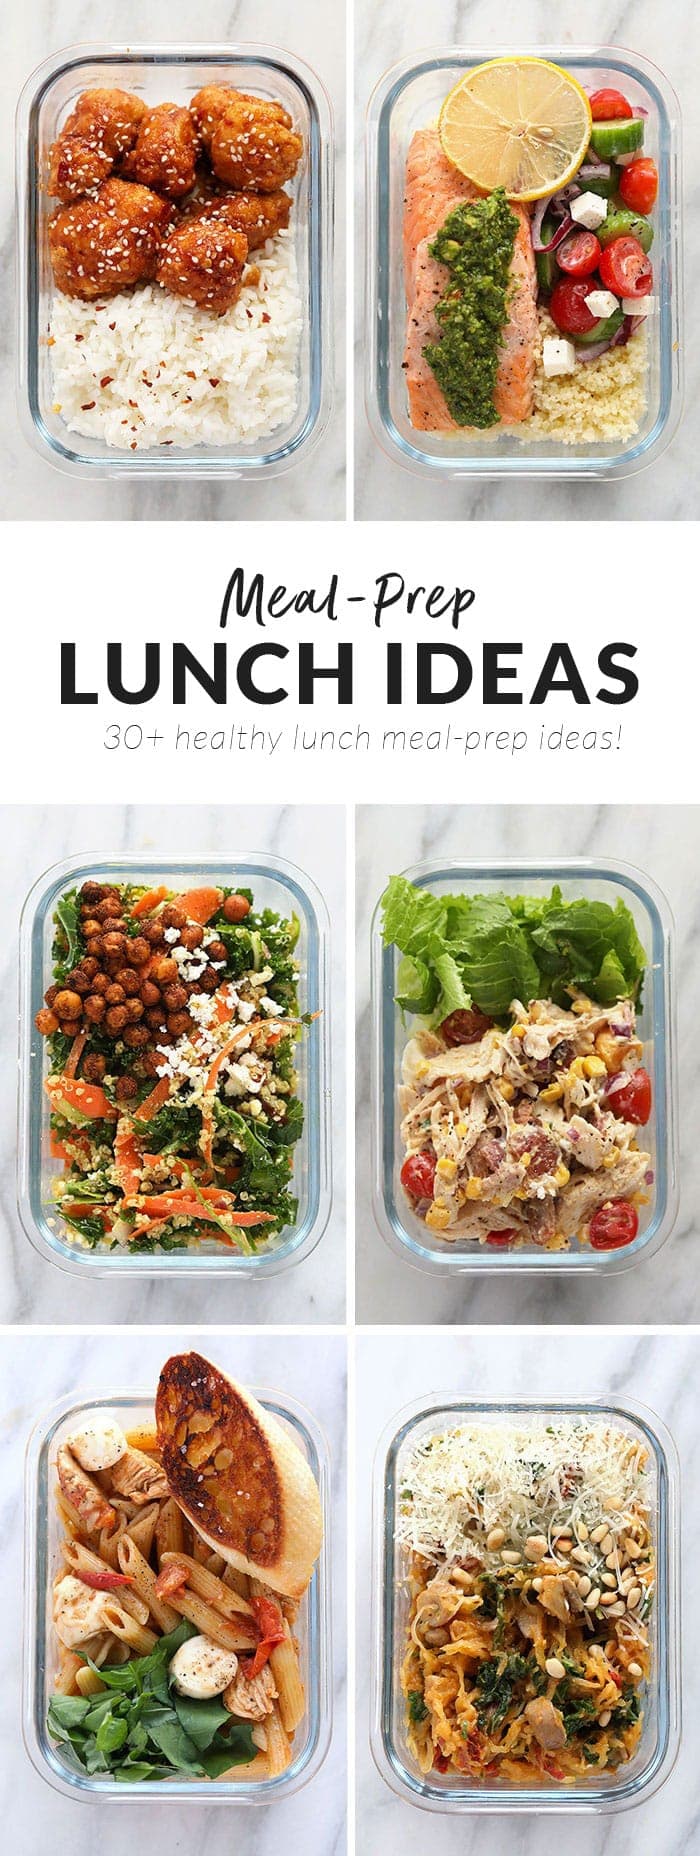 Meal prep lunch ideas with 3 different meals